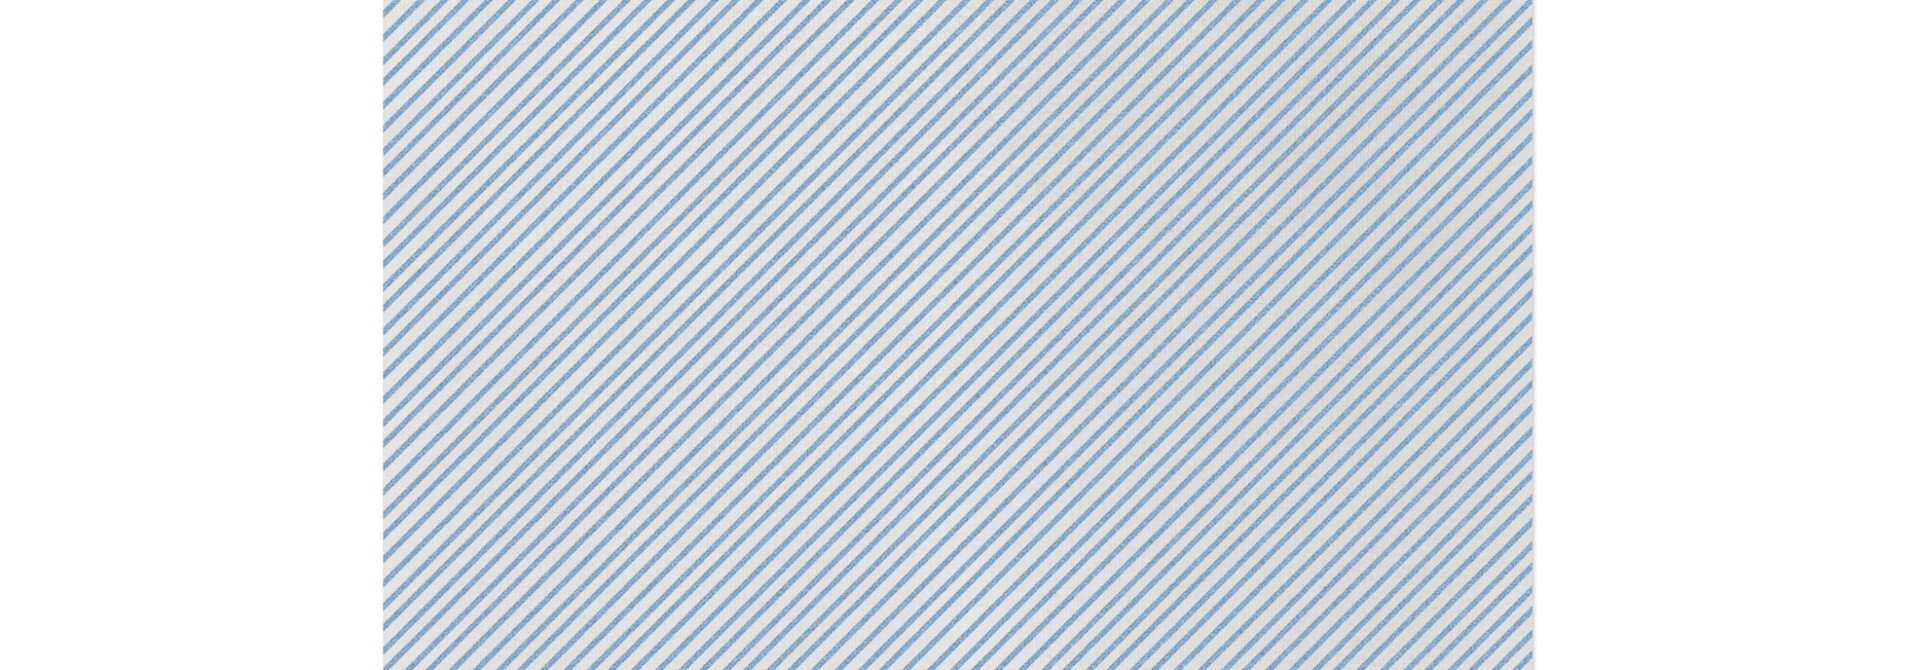 Seersucker Stripe | The Papersoft Dinner Napkin Collection Pack of 50,  Light Blue